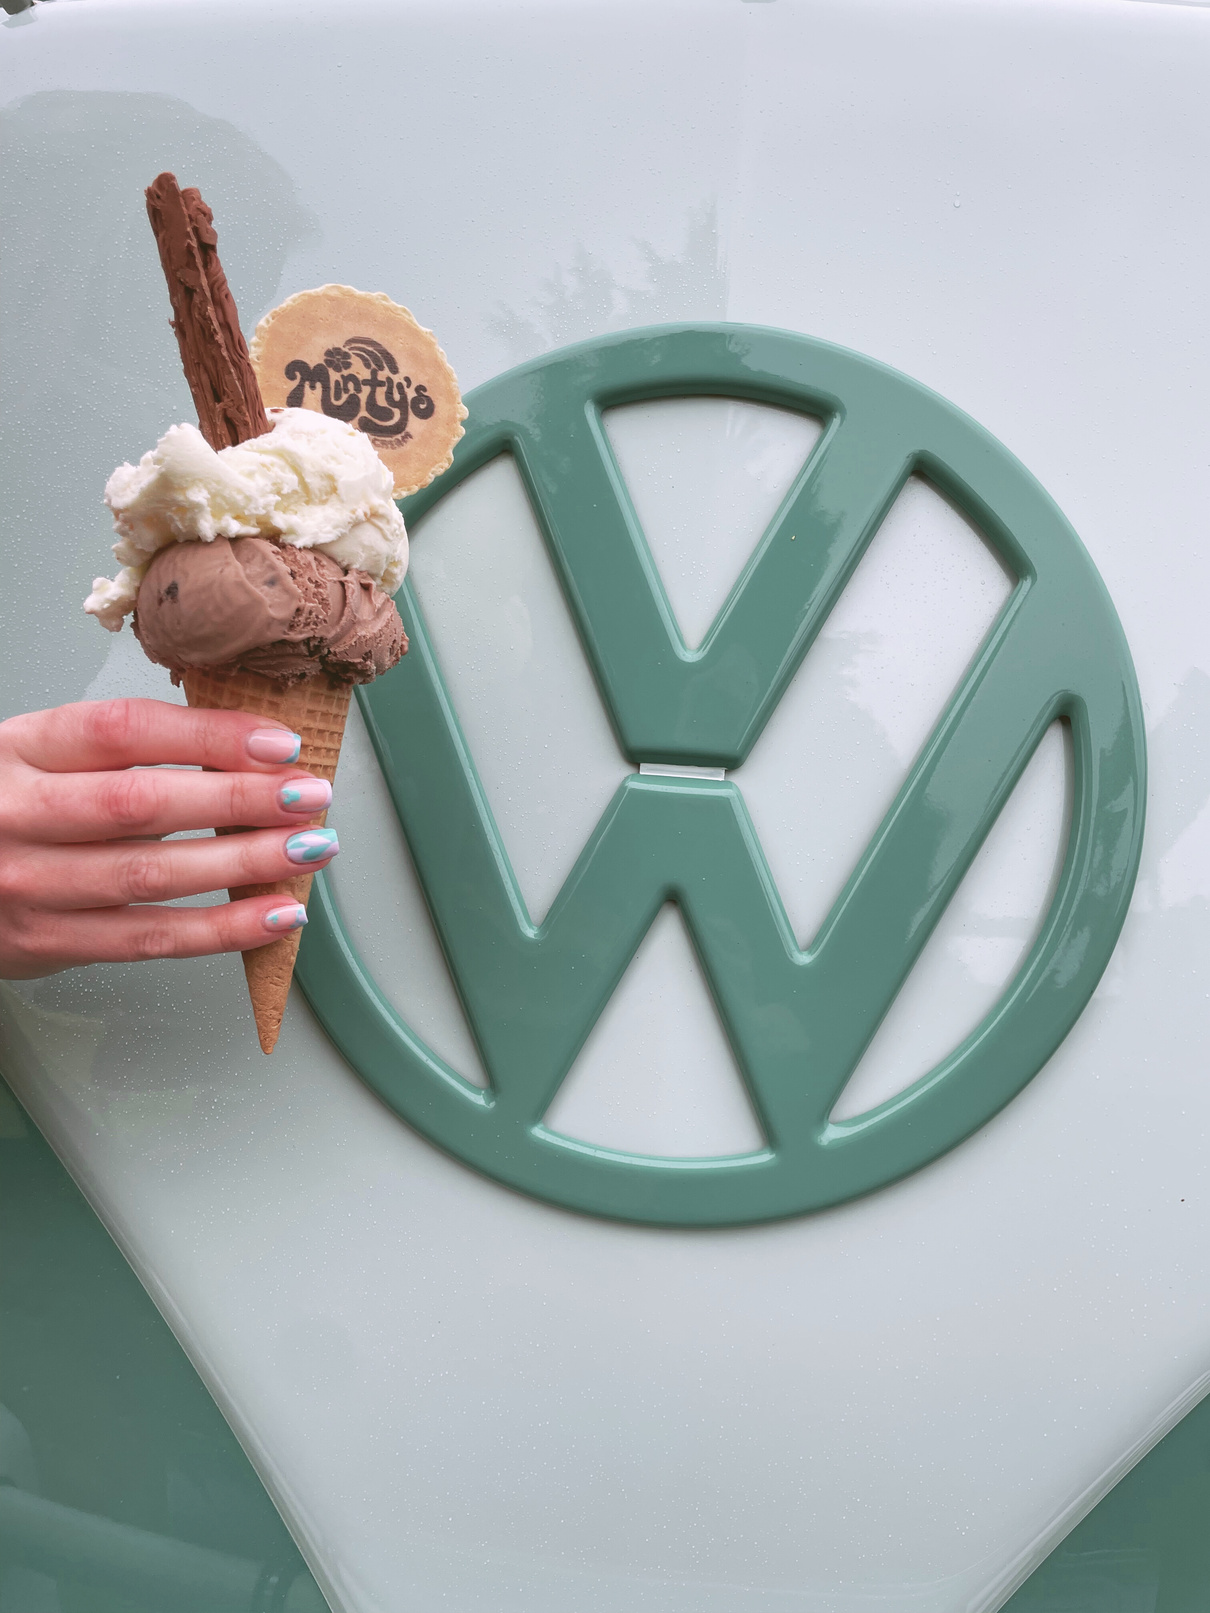 a person holding an ice cream cone in front of Minty's ice cream vintage VW Volkswagen van